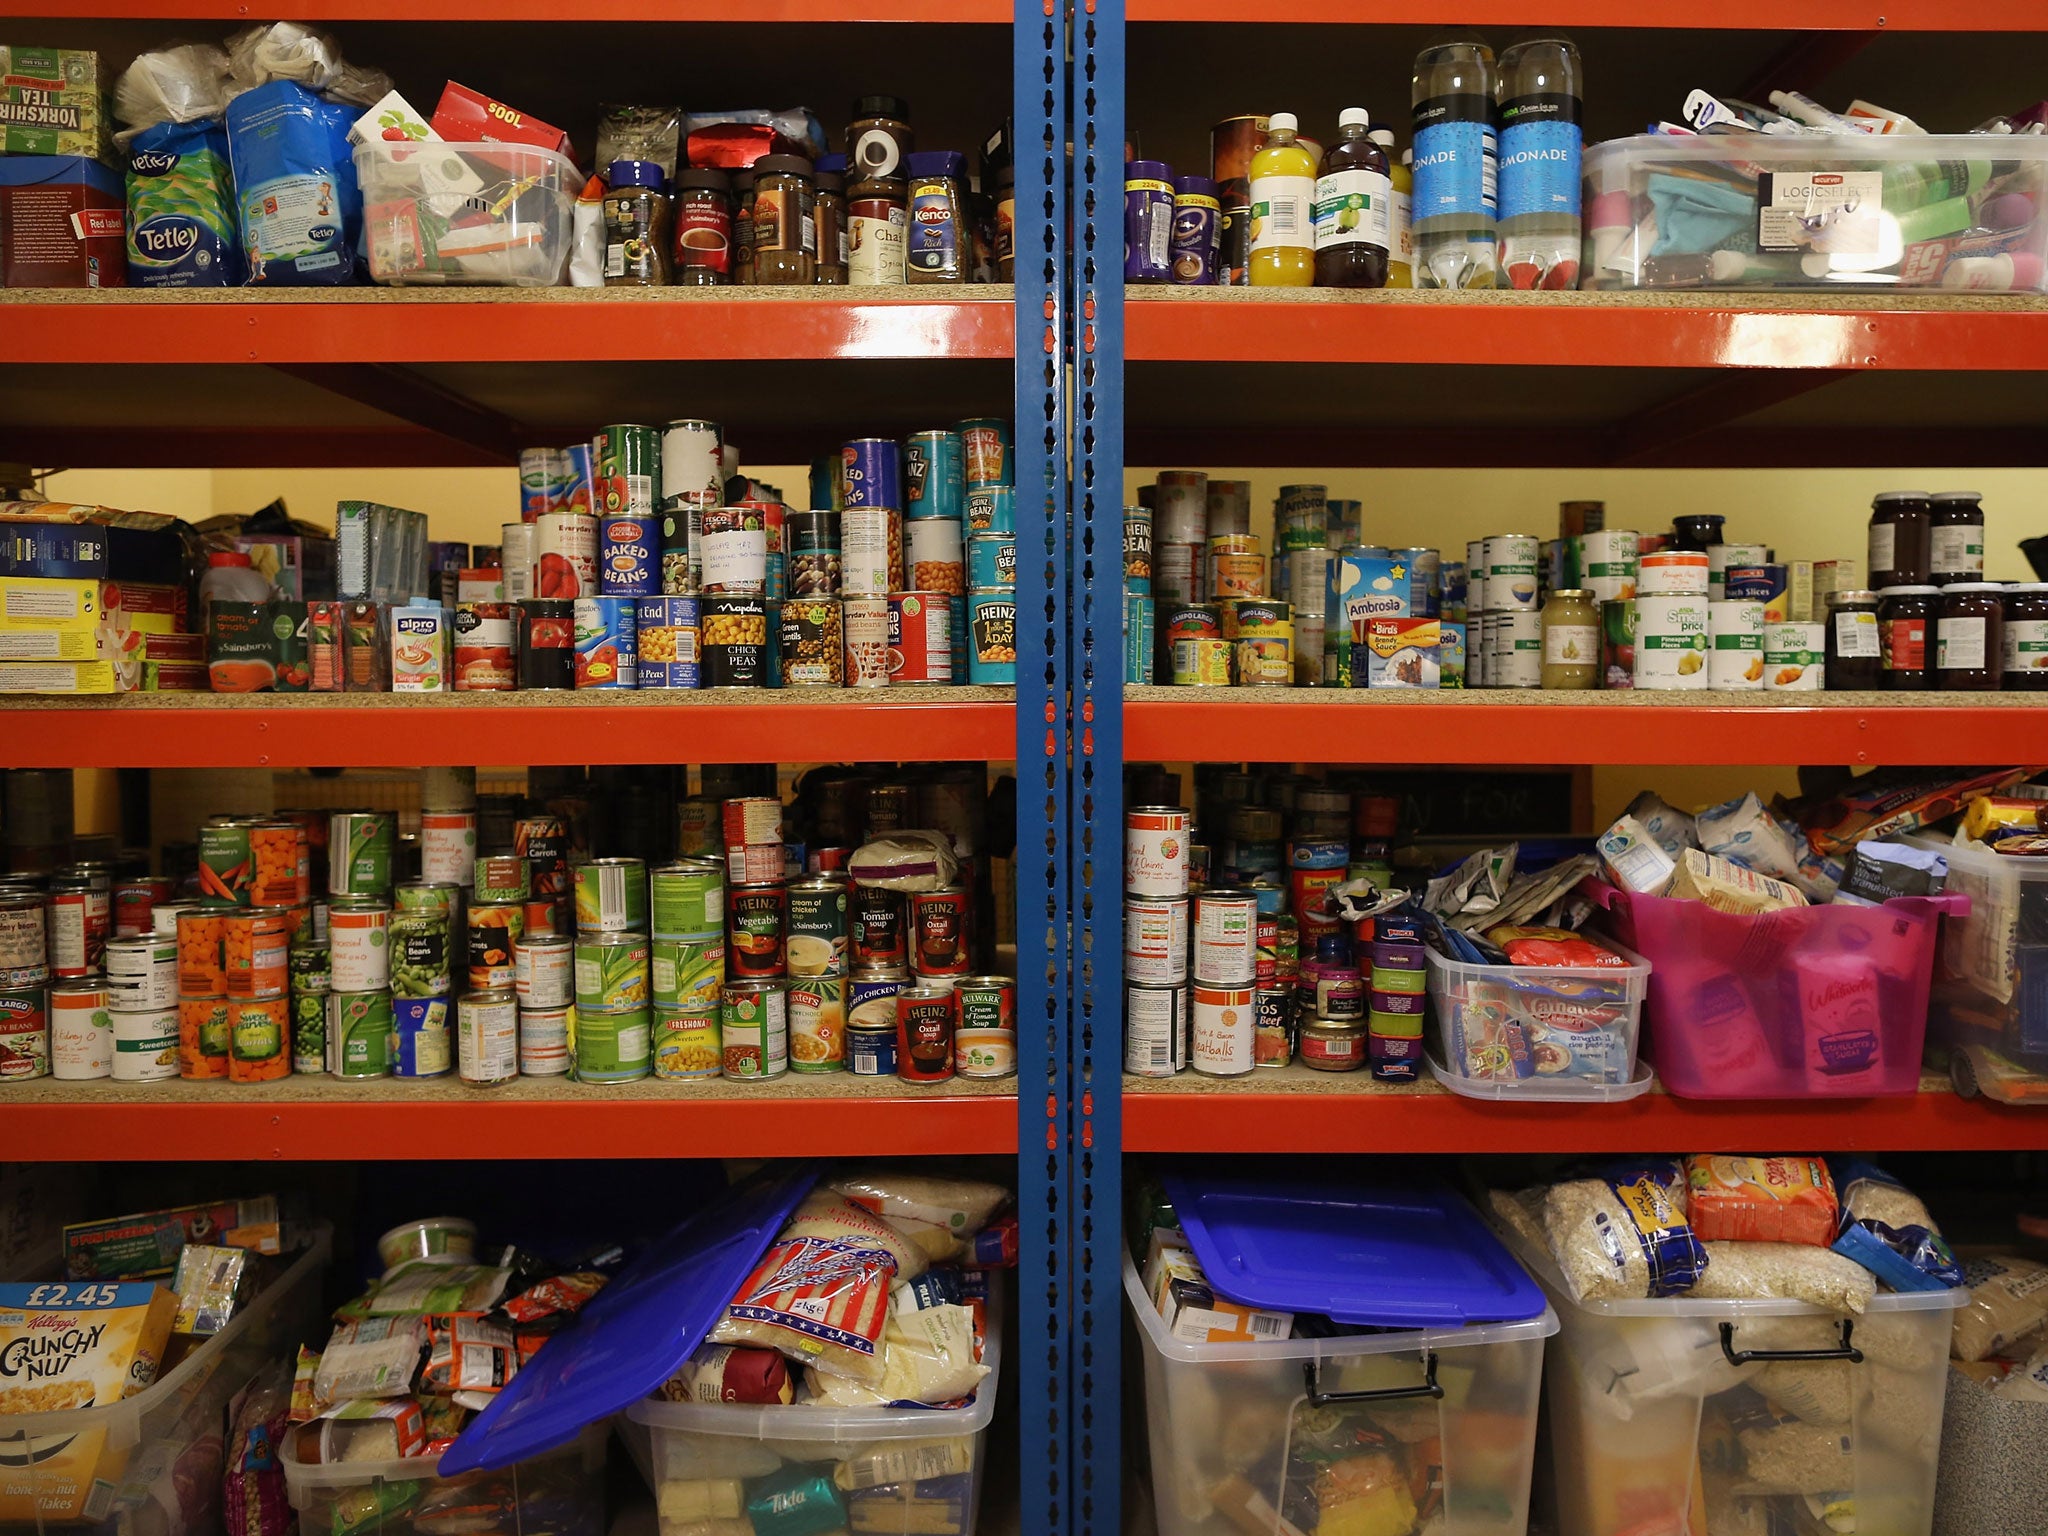 The Trussell Trust has launched an appeal for donations to help it cope with the rising number of people relying on food banks